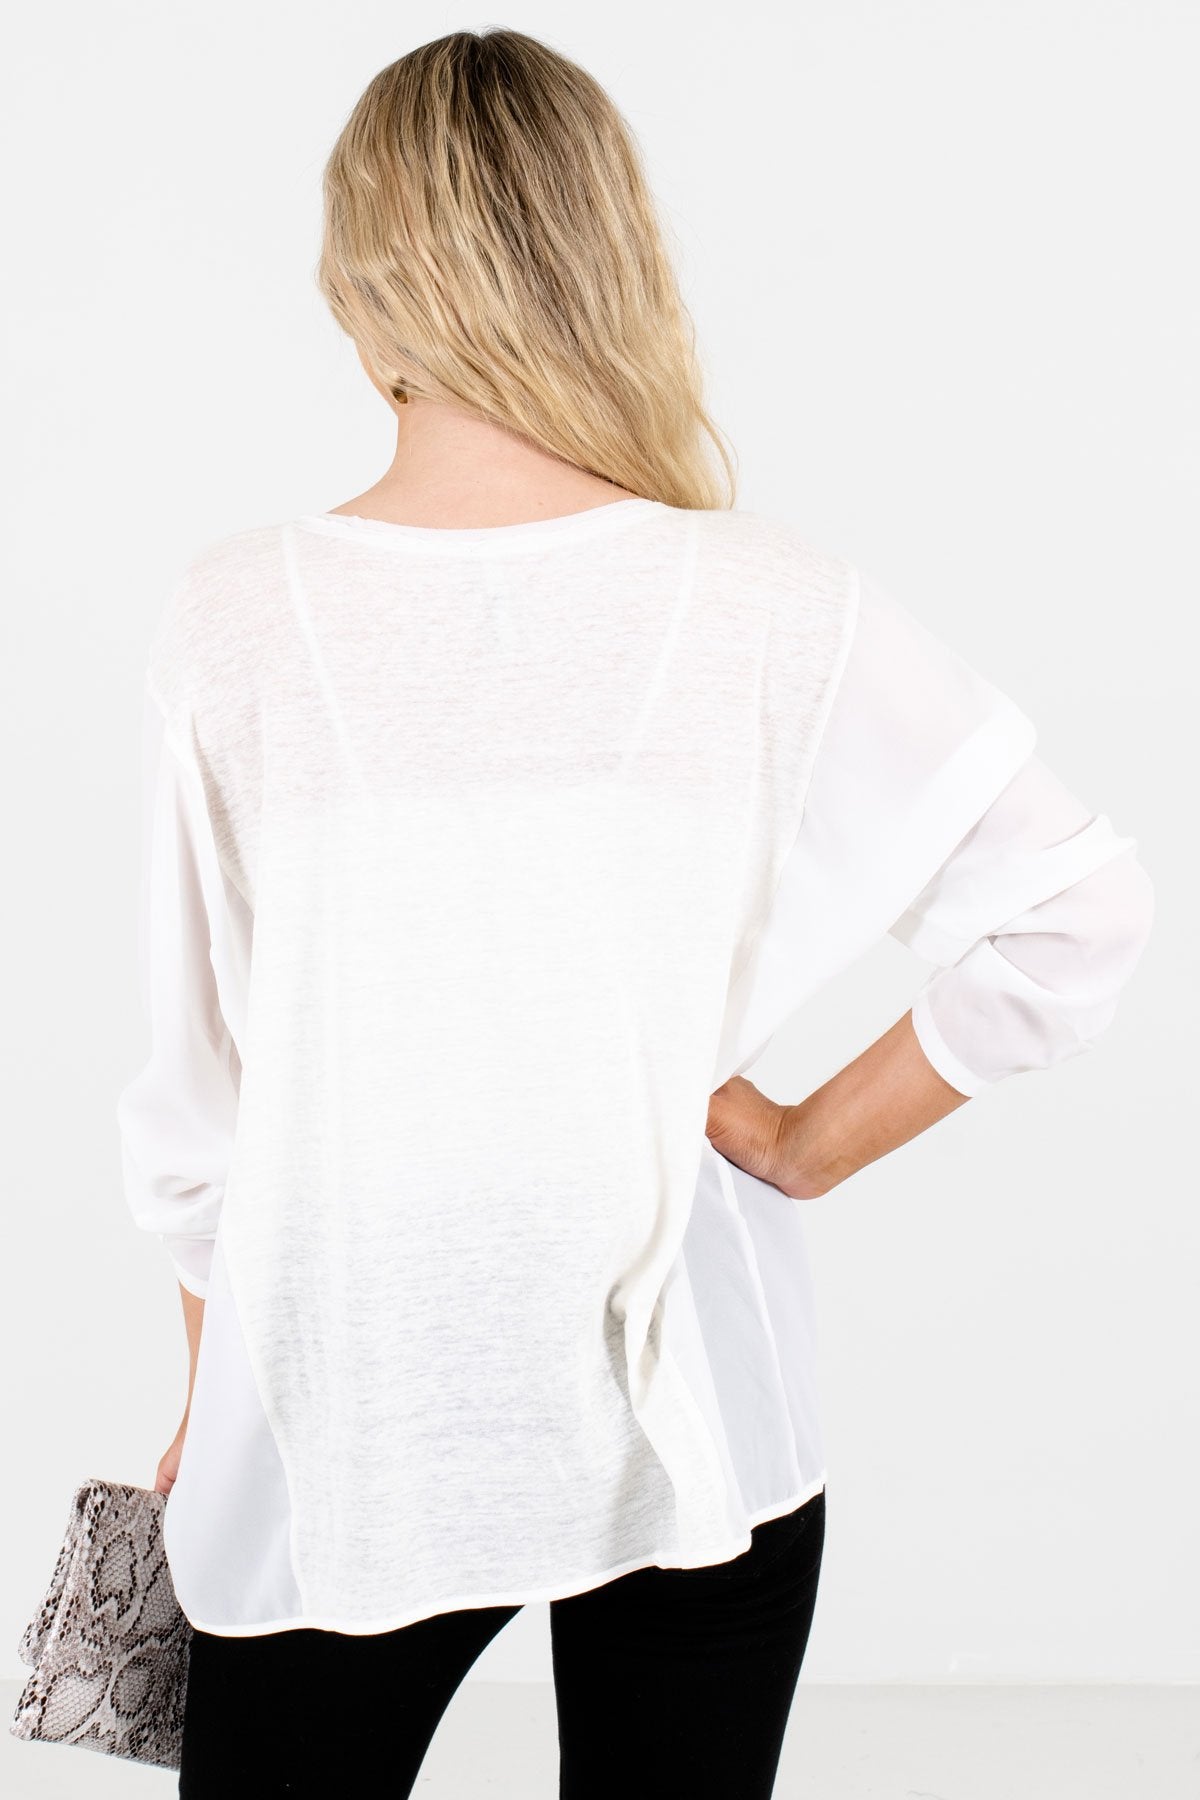 Women's White 3/4 Length Sleeve Boutique Tops